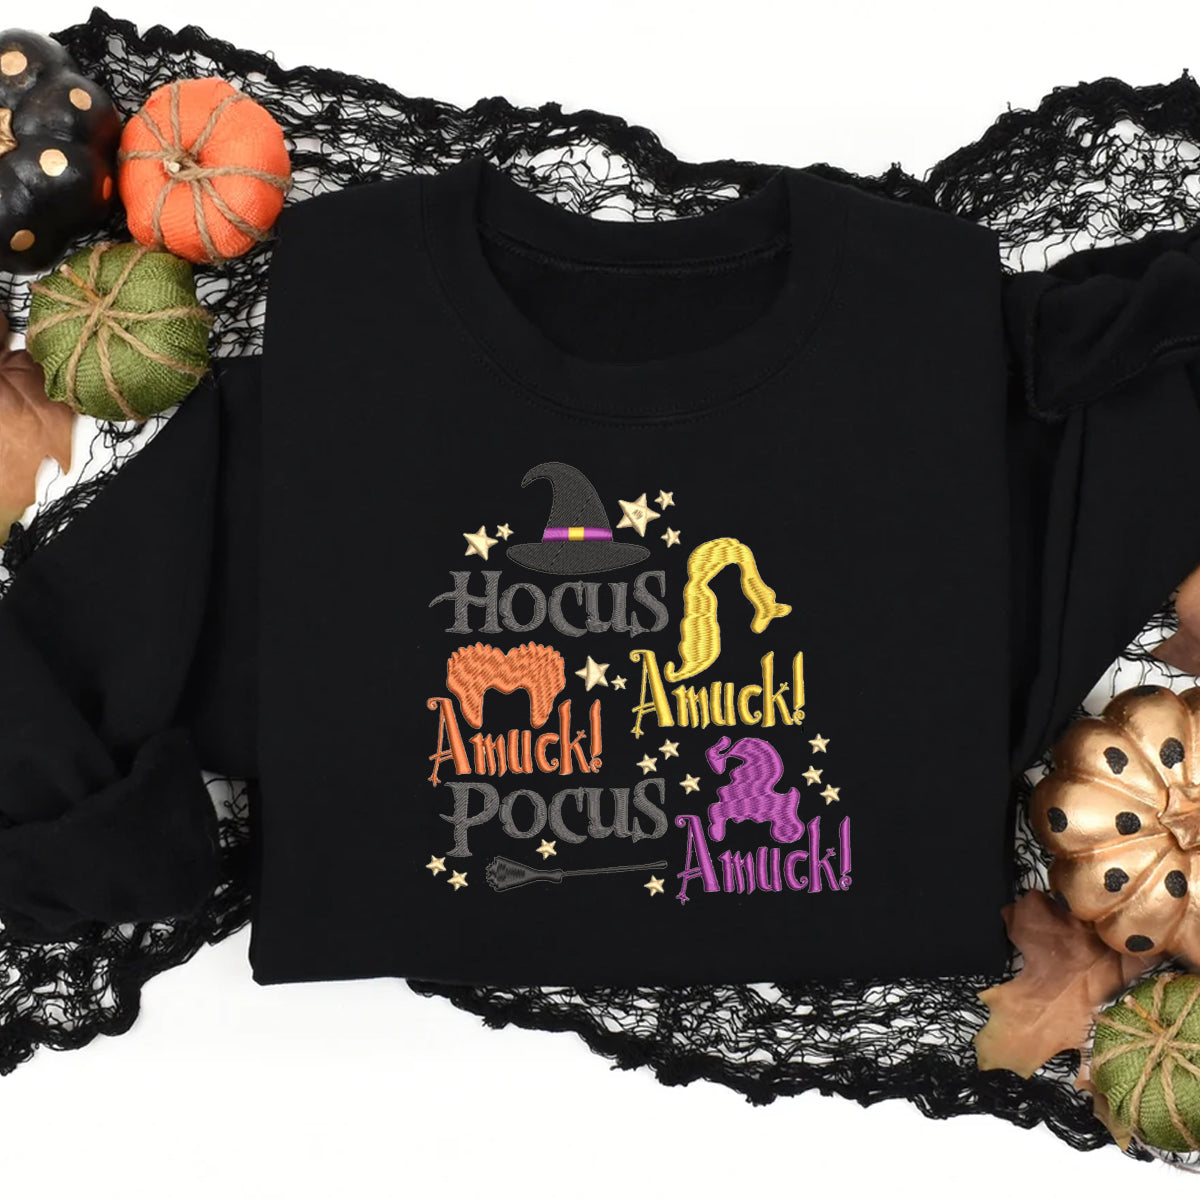 Hocus Pocus Amuck - Embroidered Apparel - Gift For Friends, Family, Halloween